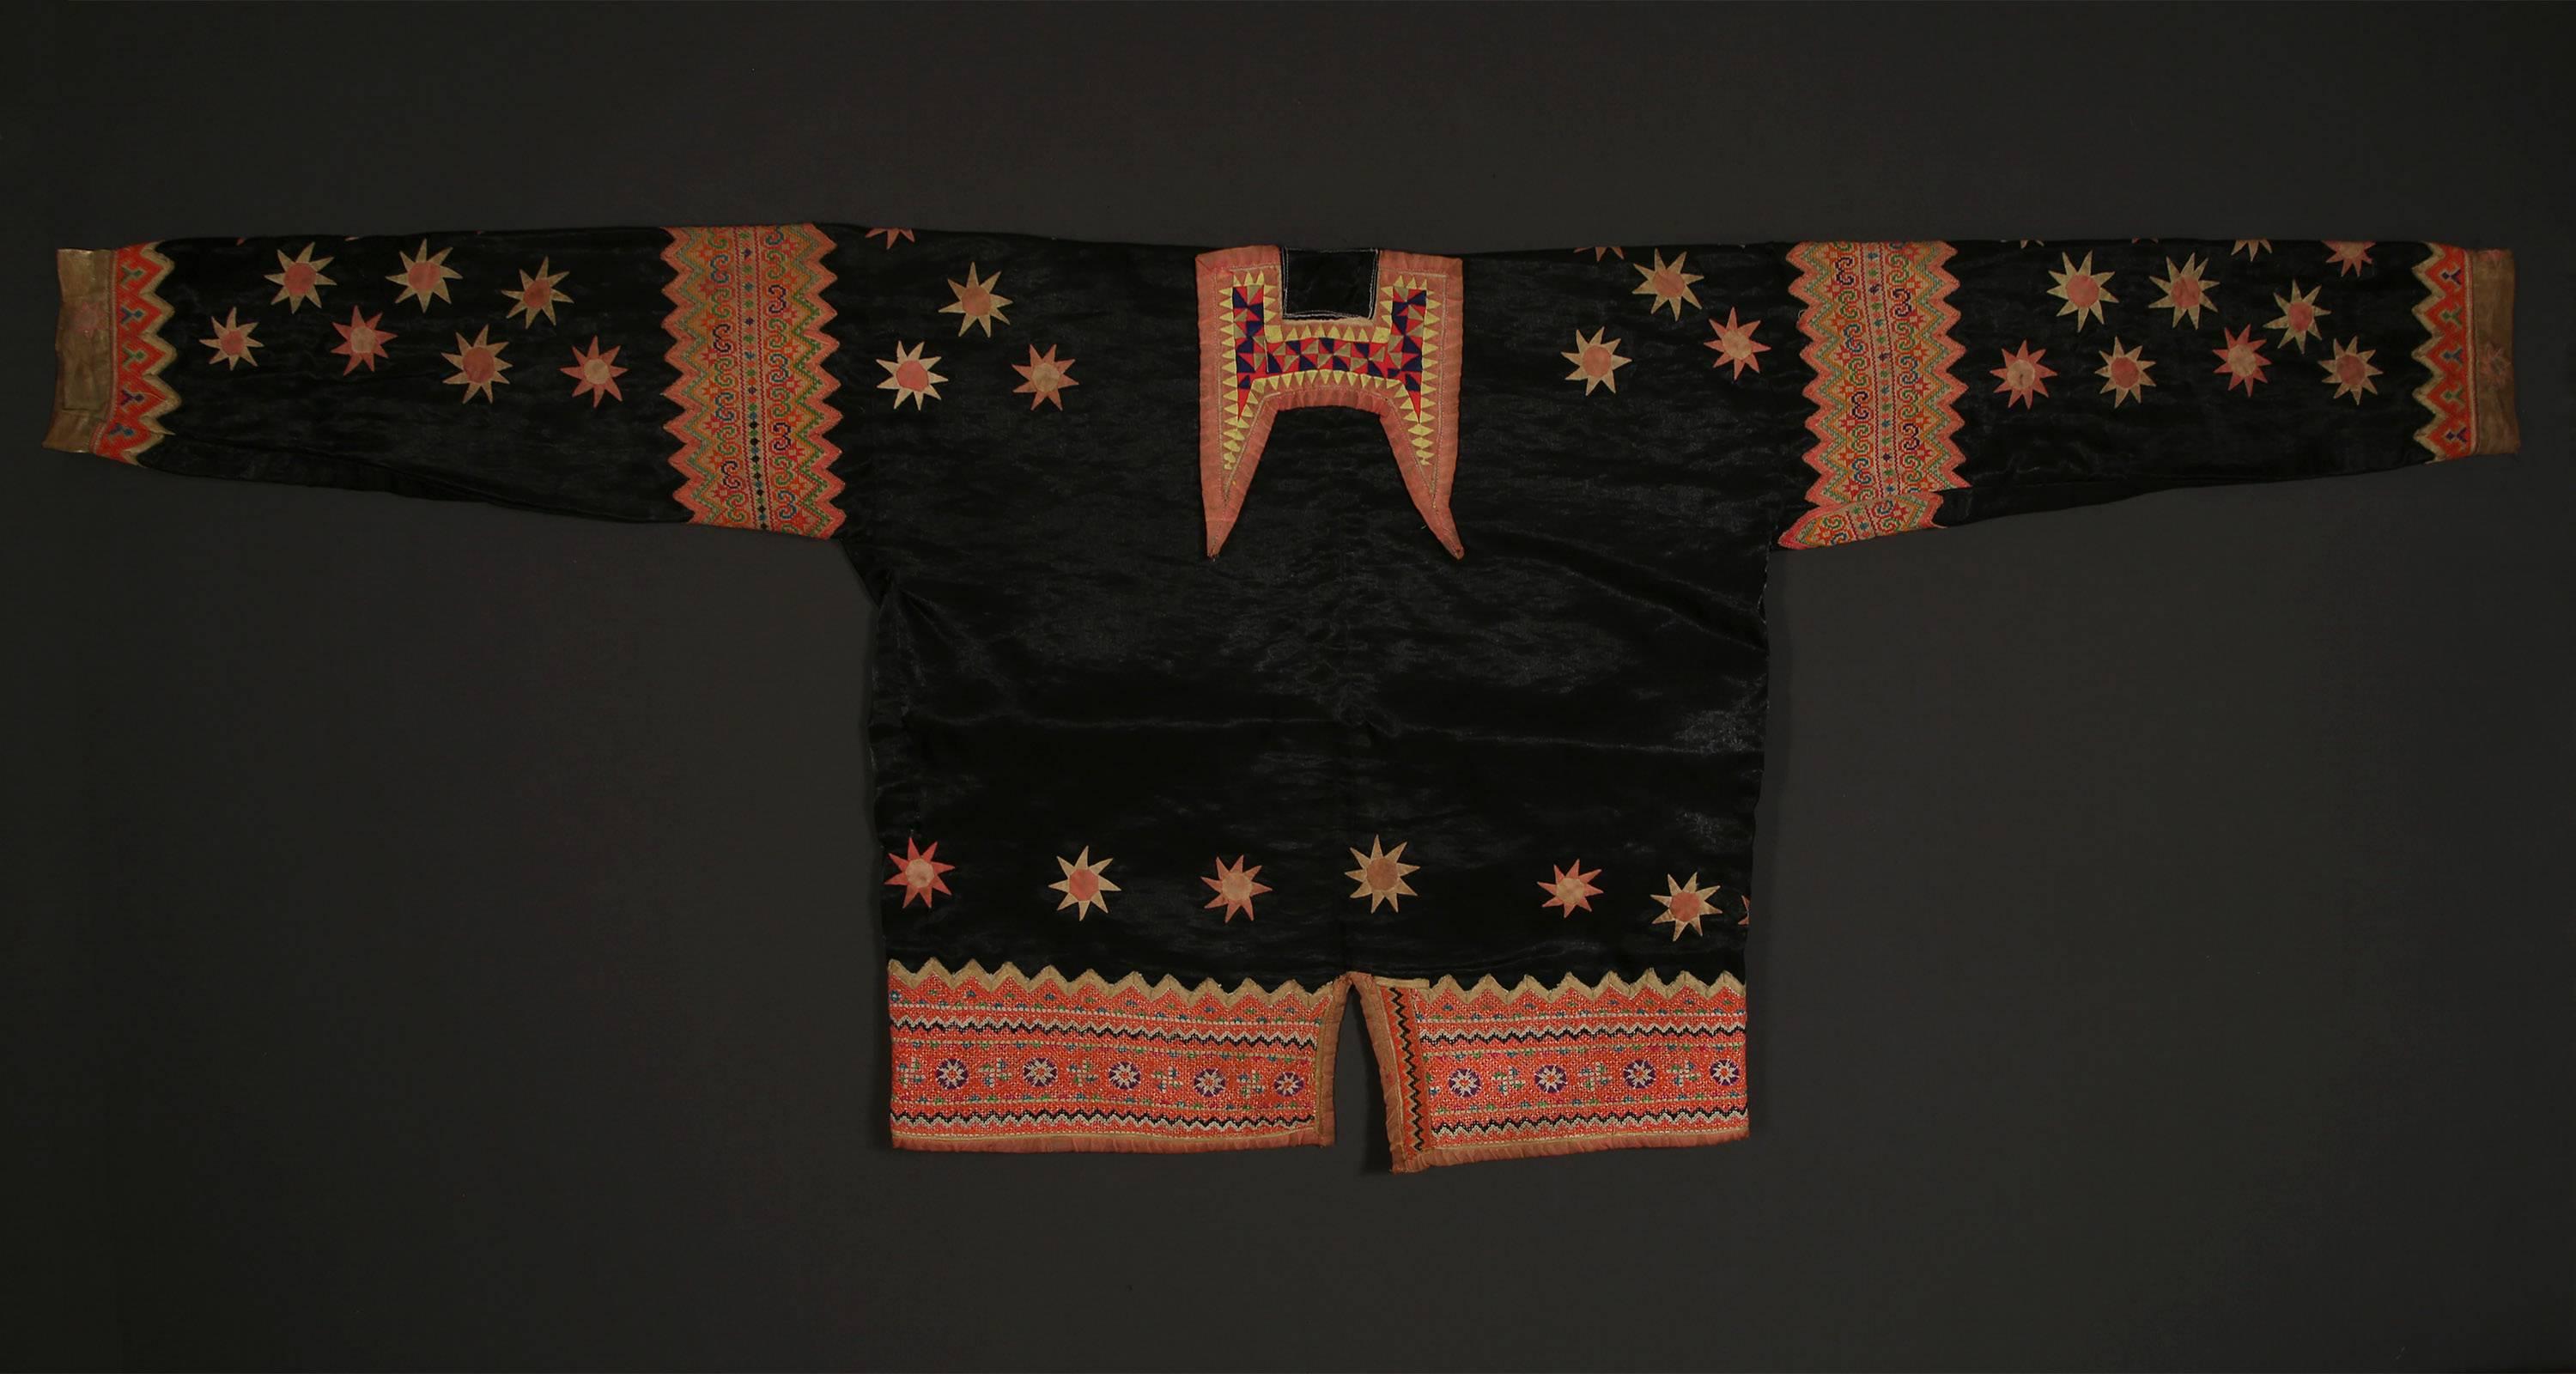 Black star jacket from the Hmong people Laos, early 20th century
A boldly decorated jacket with bright appliqué’ star shapes and intricate cross-stitch embroidery is a unique example of the traditional costume making of the Hmong people. Very good